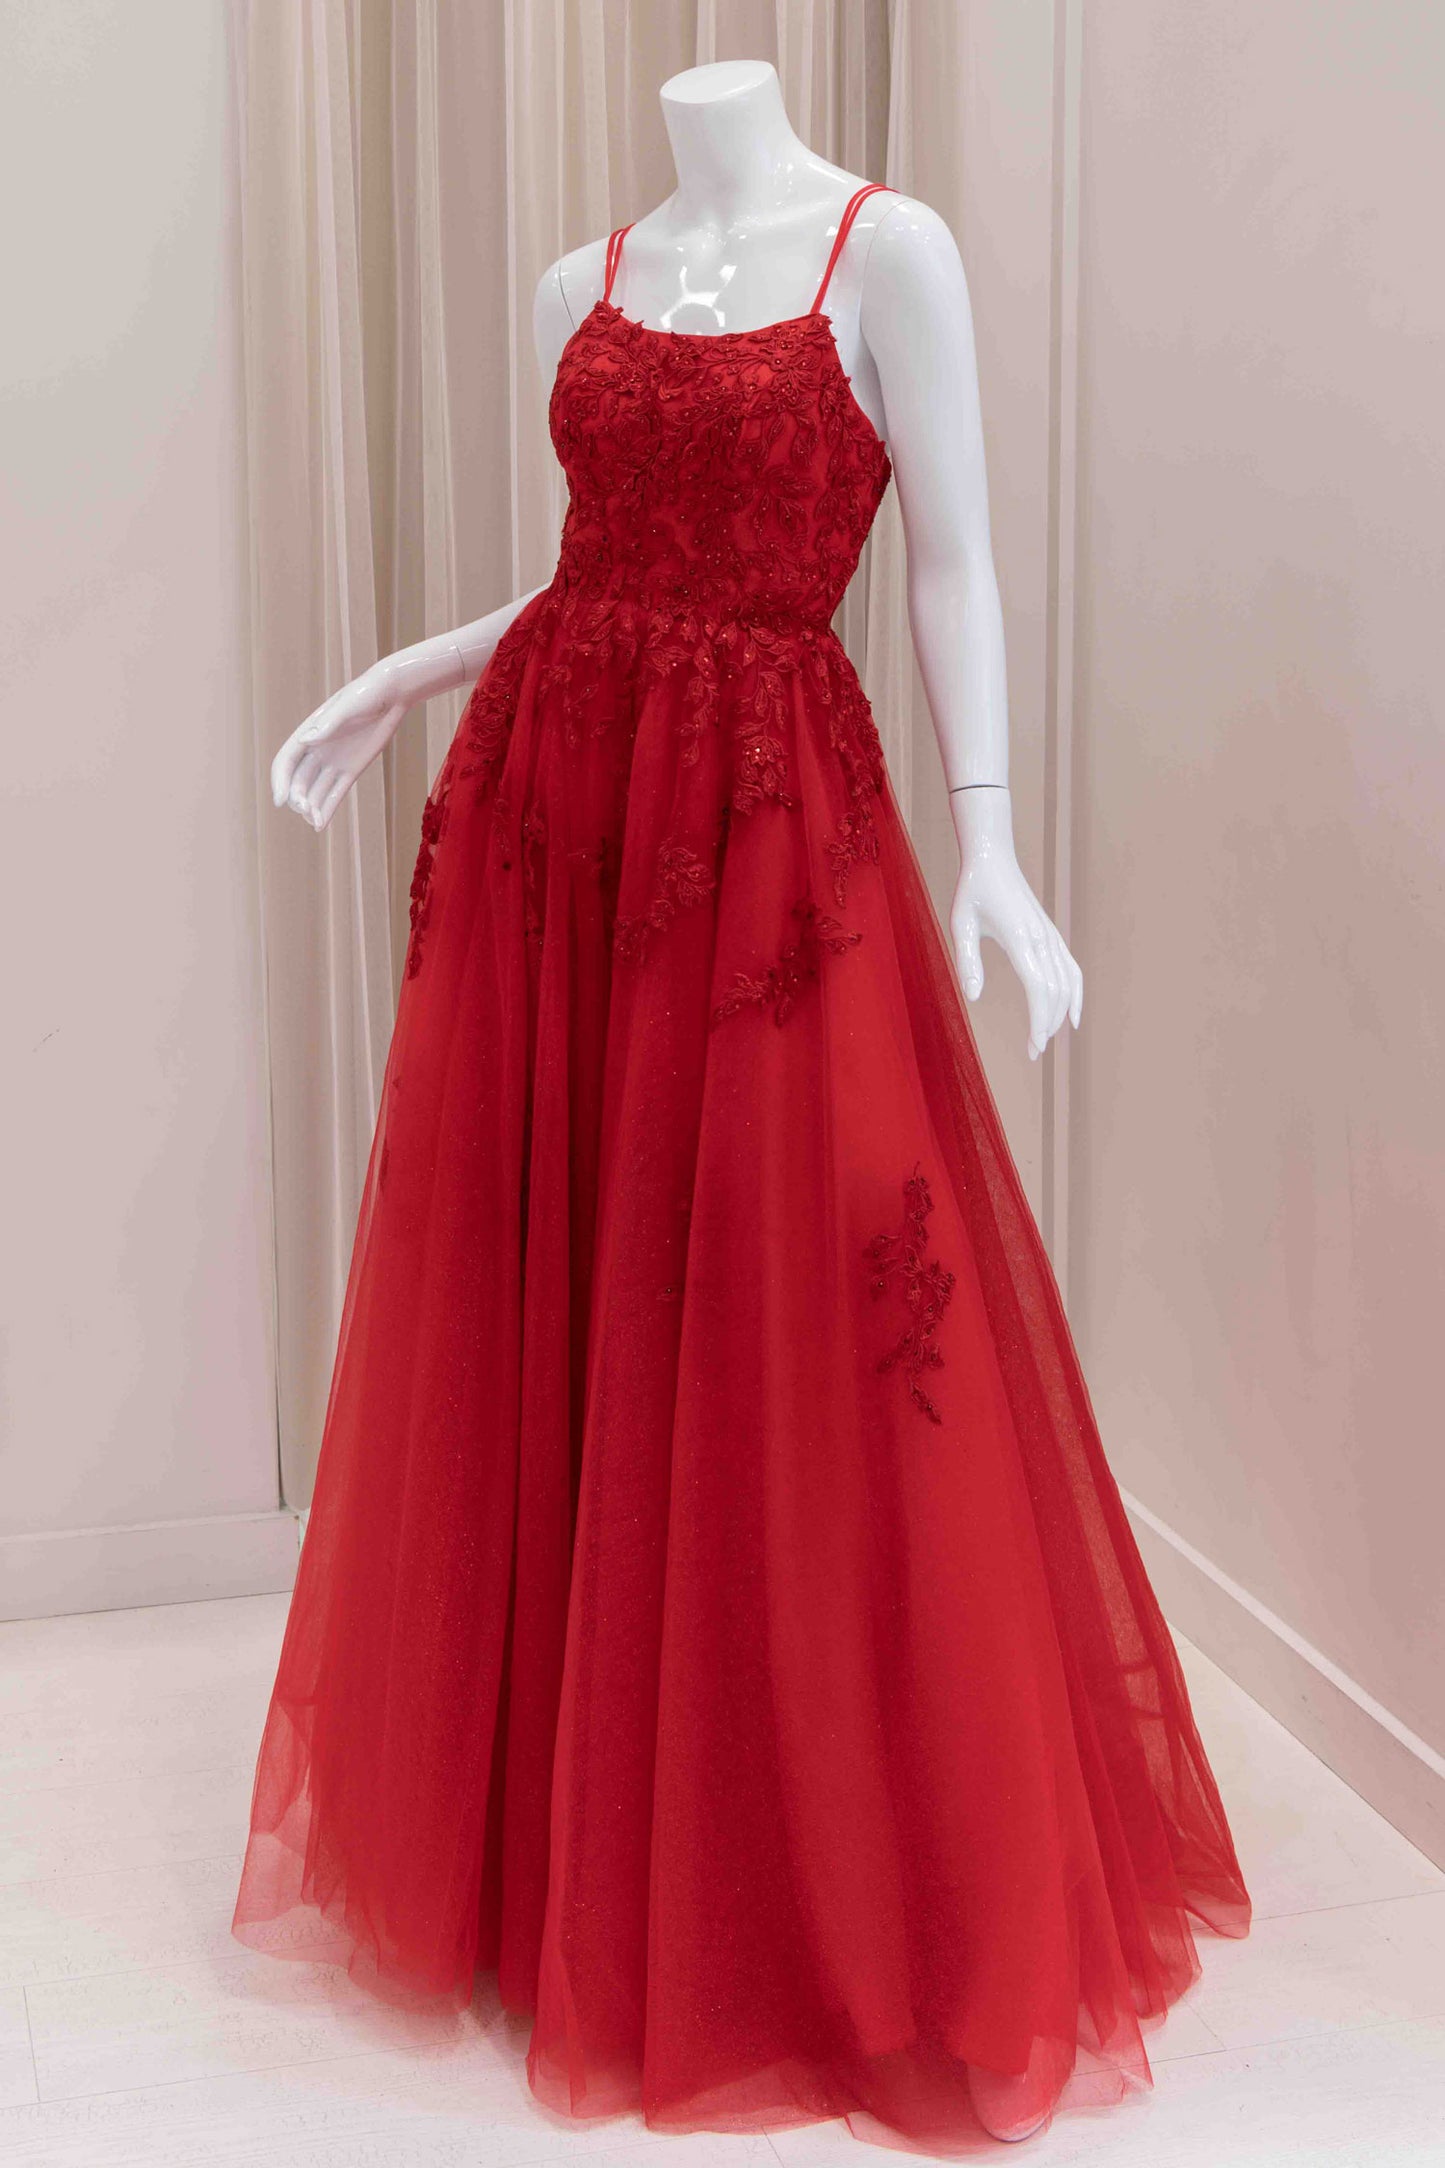 Isolda 3D Applique Ball Gown in Red